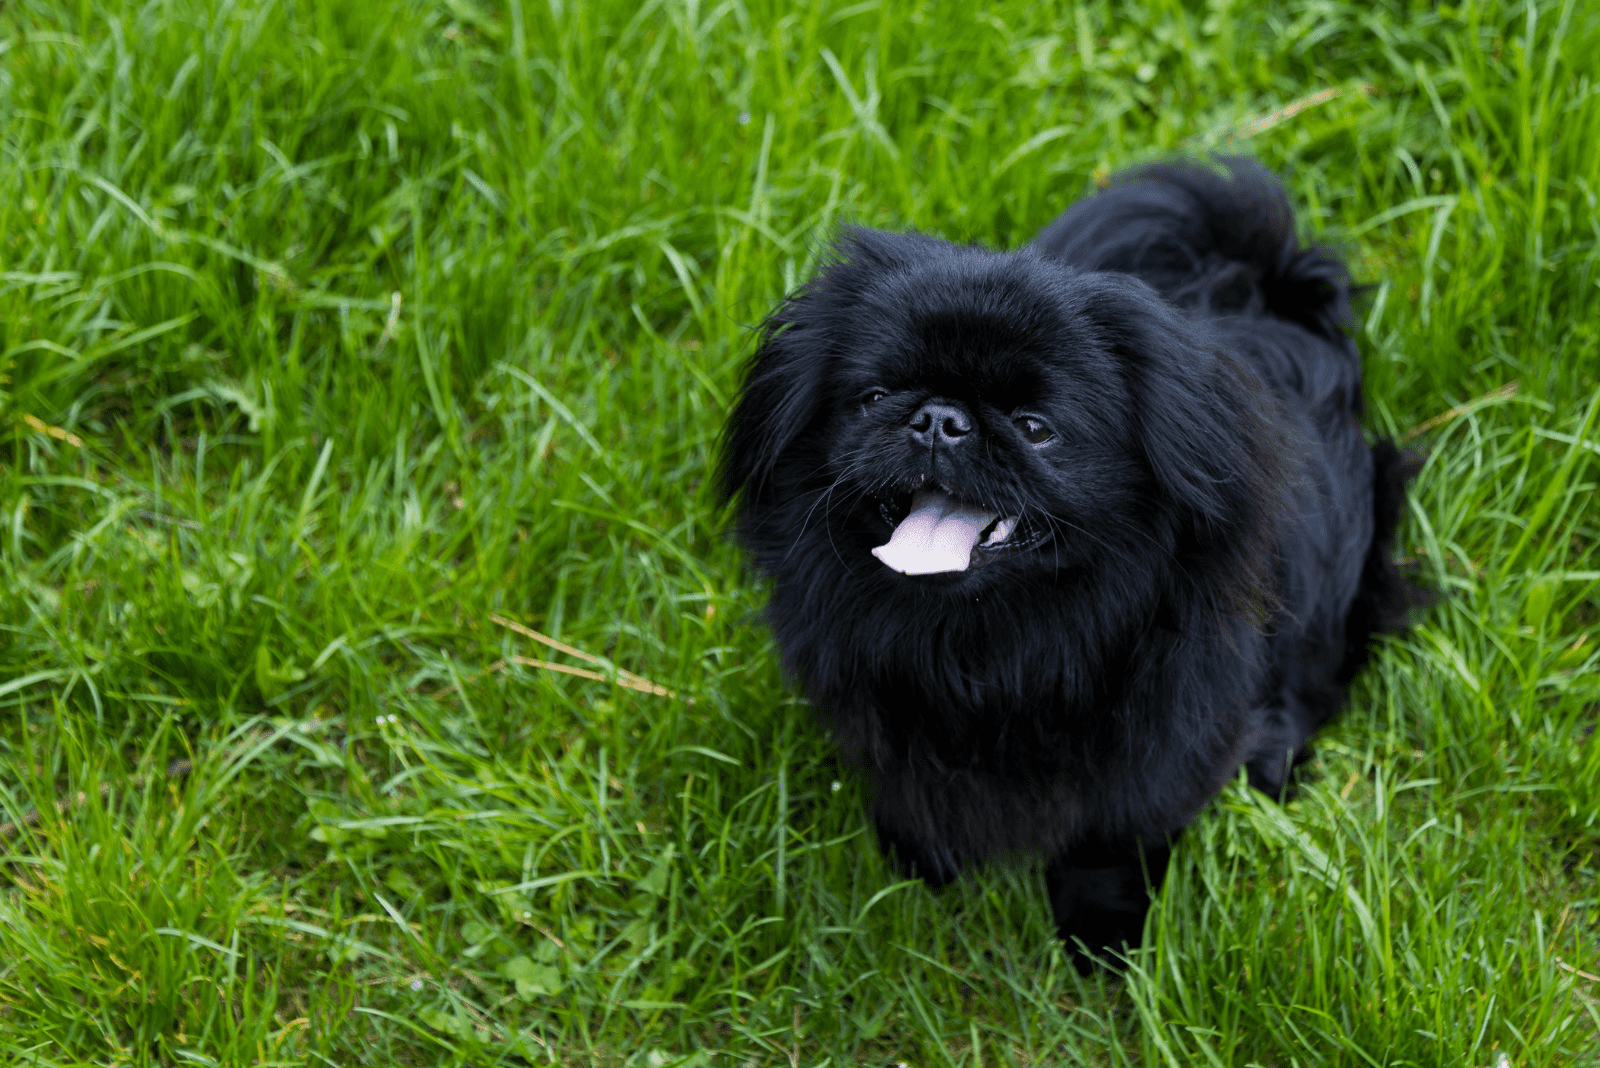 a black Pekingese puppy sits on the grass with his tongue out